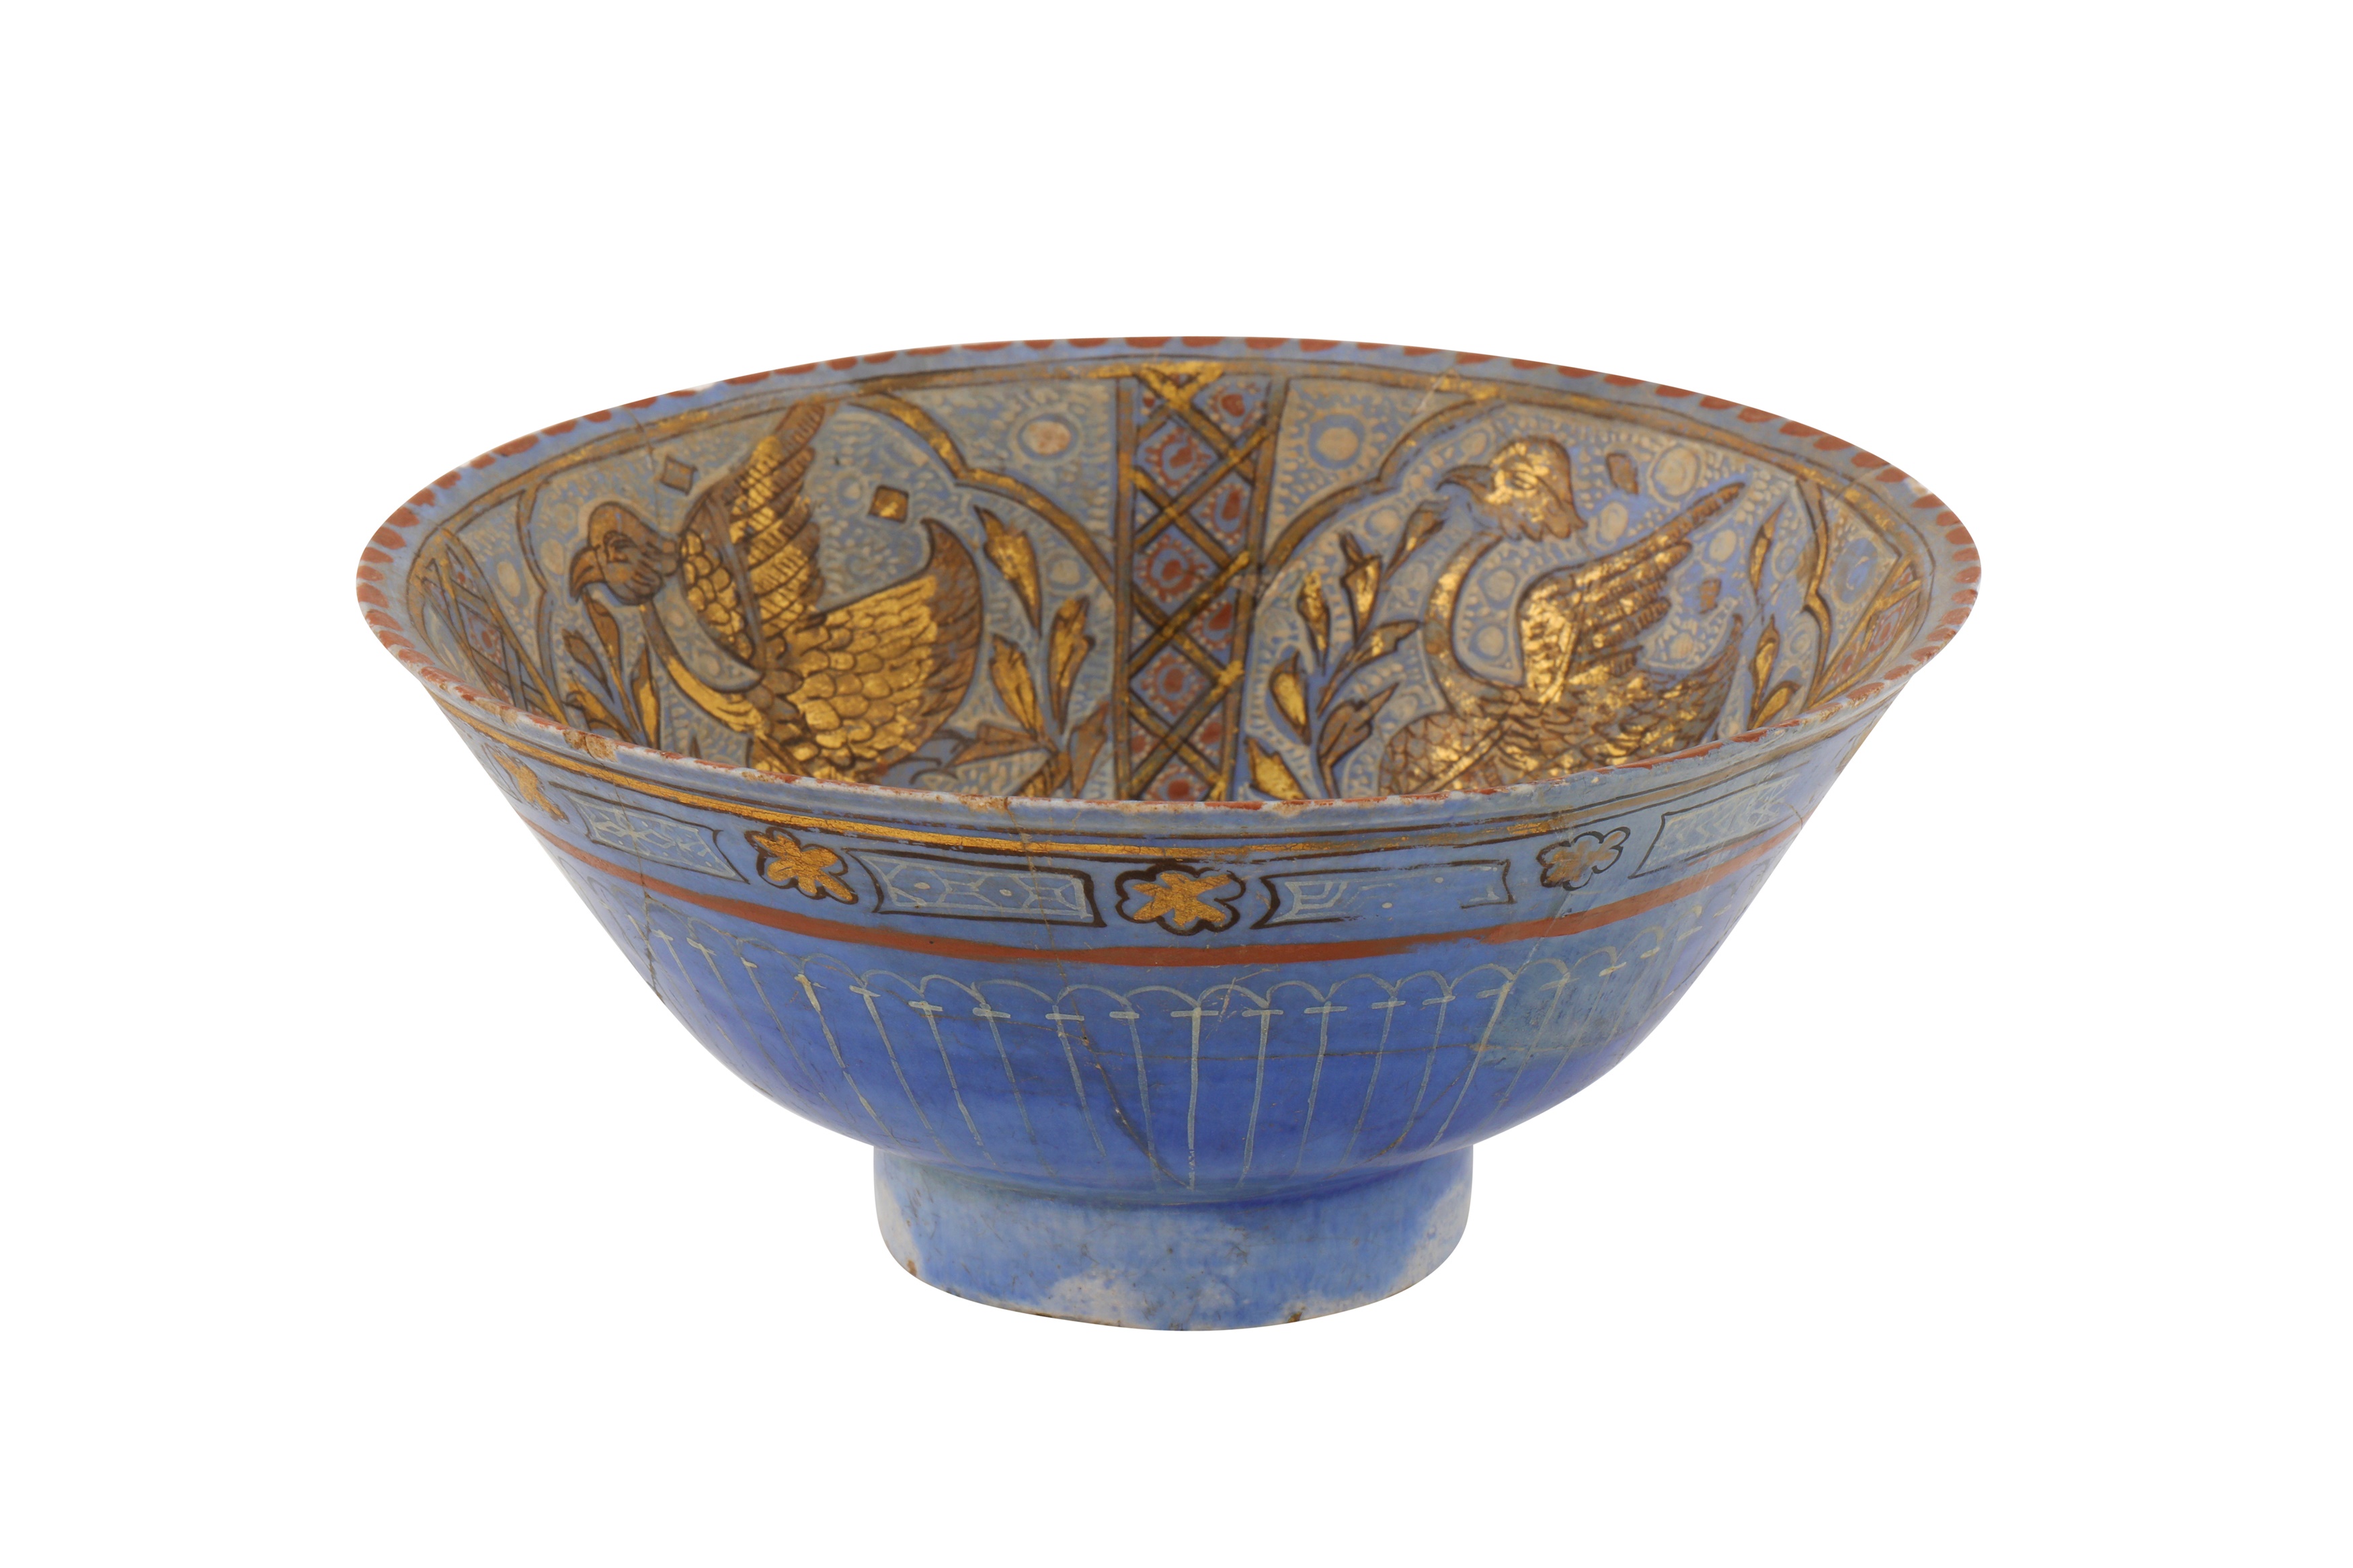 A VERY FINE POSSIBLY 12TH-13TH CENTURY PERSIAN SELJUK MINA’I GILDED AND GLAZED POTTERY BOWL - Image 3 of 4